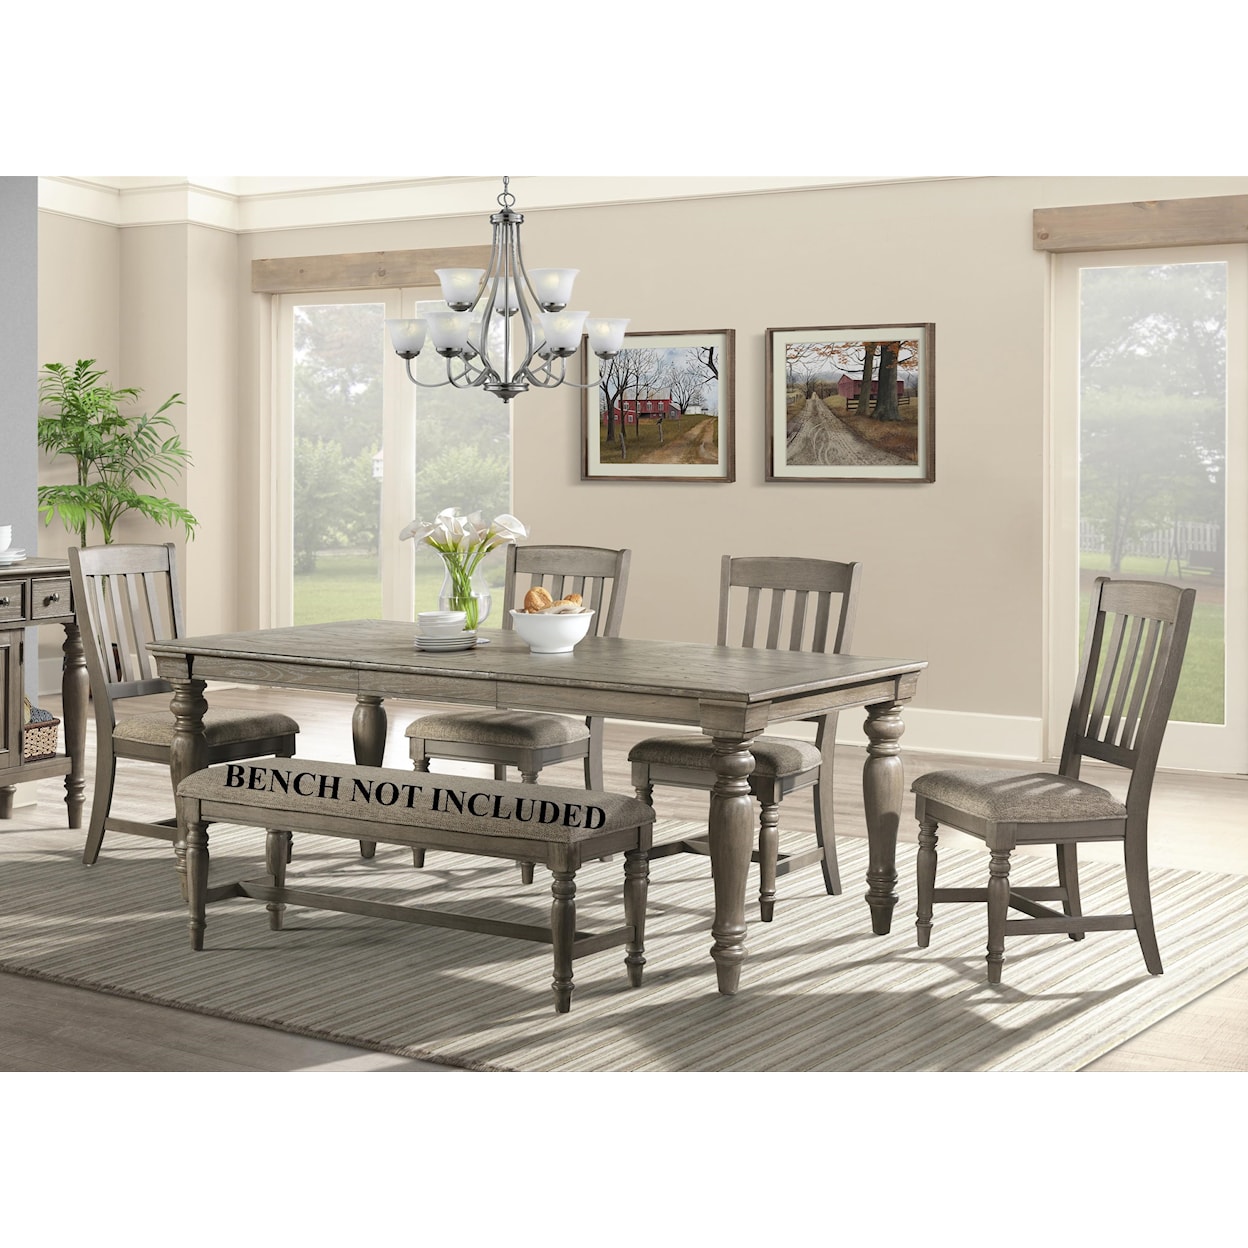 Intercon Balboa Park Table and Chair Set